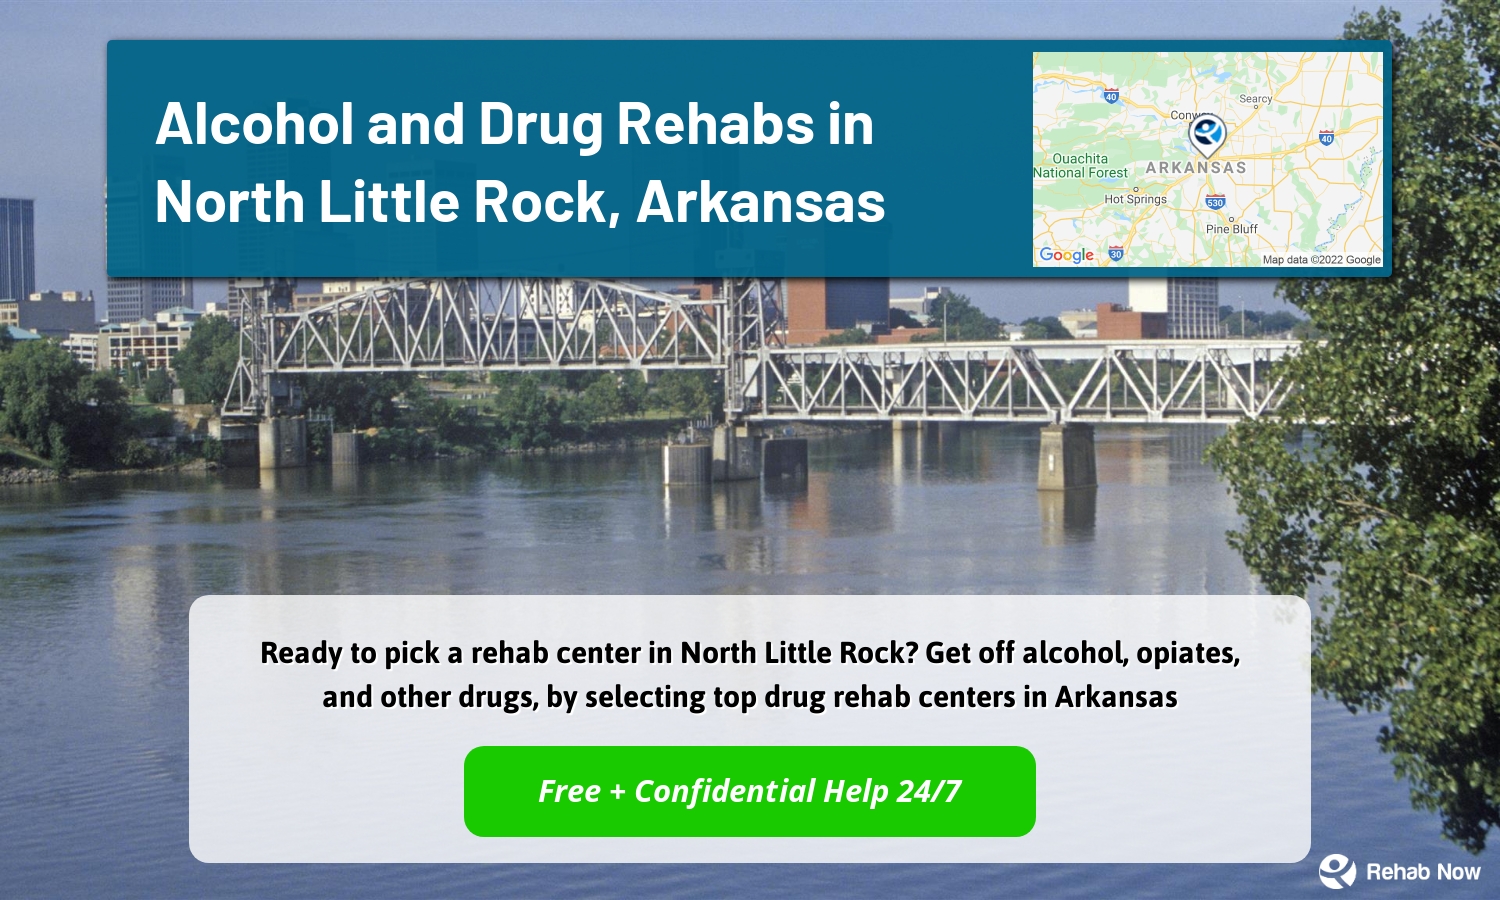 Ready to pick a rehab center in North Little Rock? Get off alcohol, opiates, and other drugs, by selecting top drug rehab centers in Arkansas